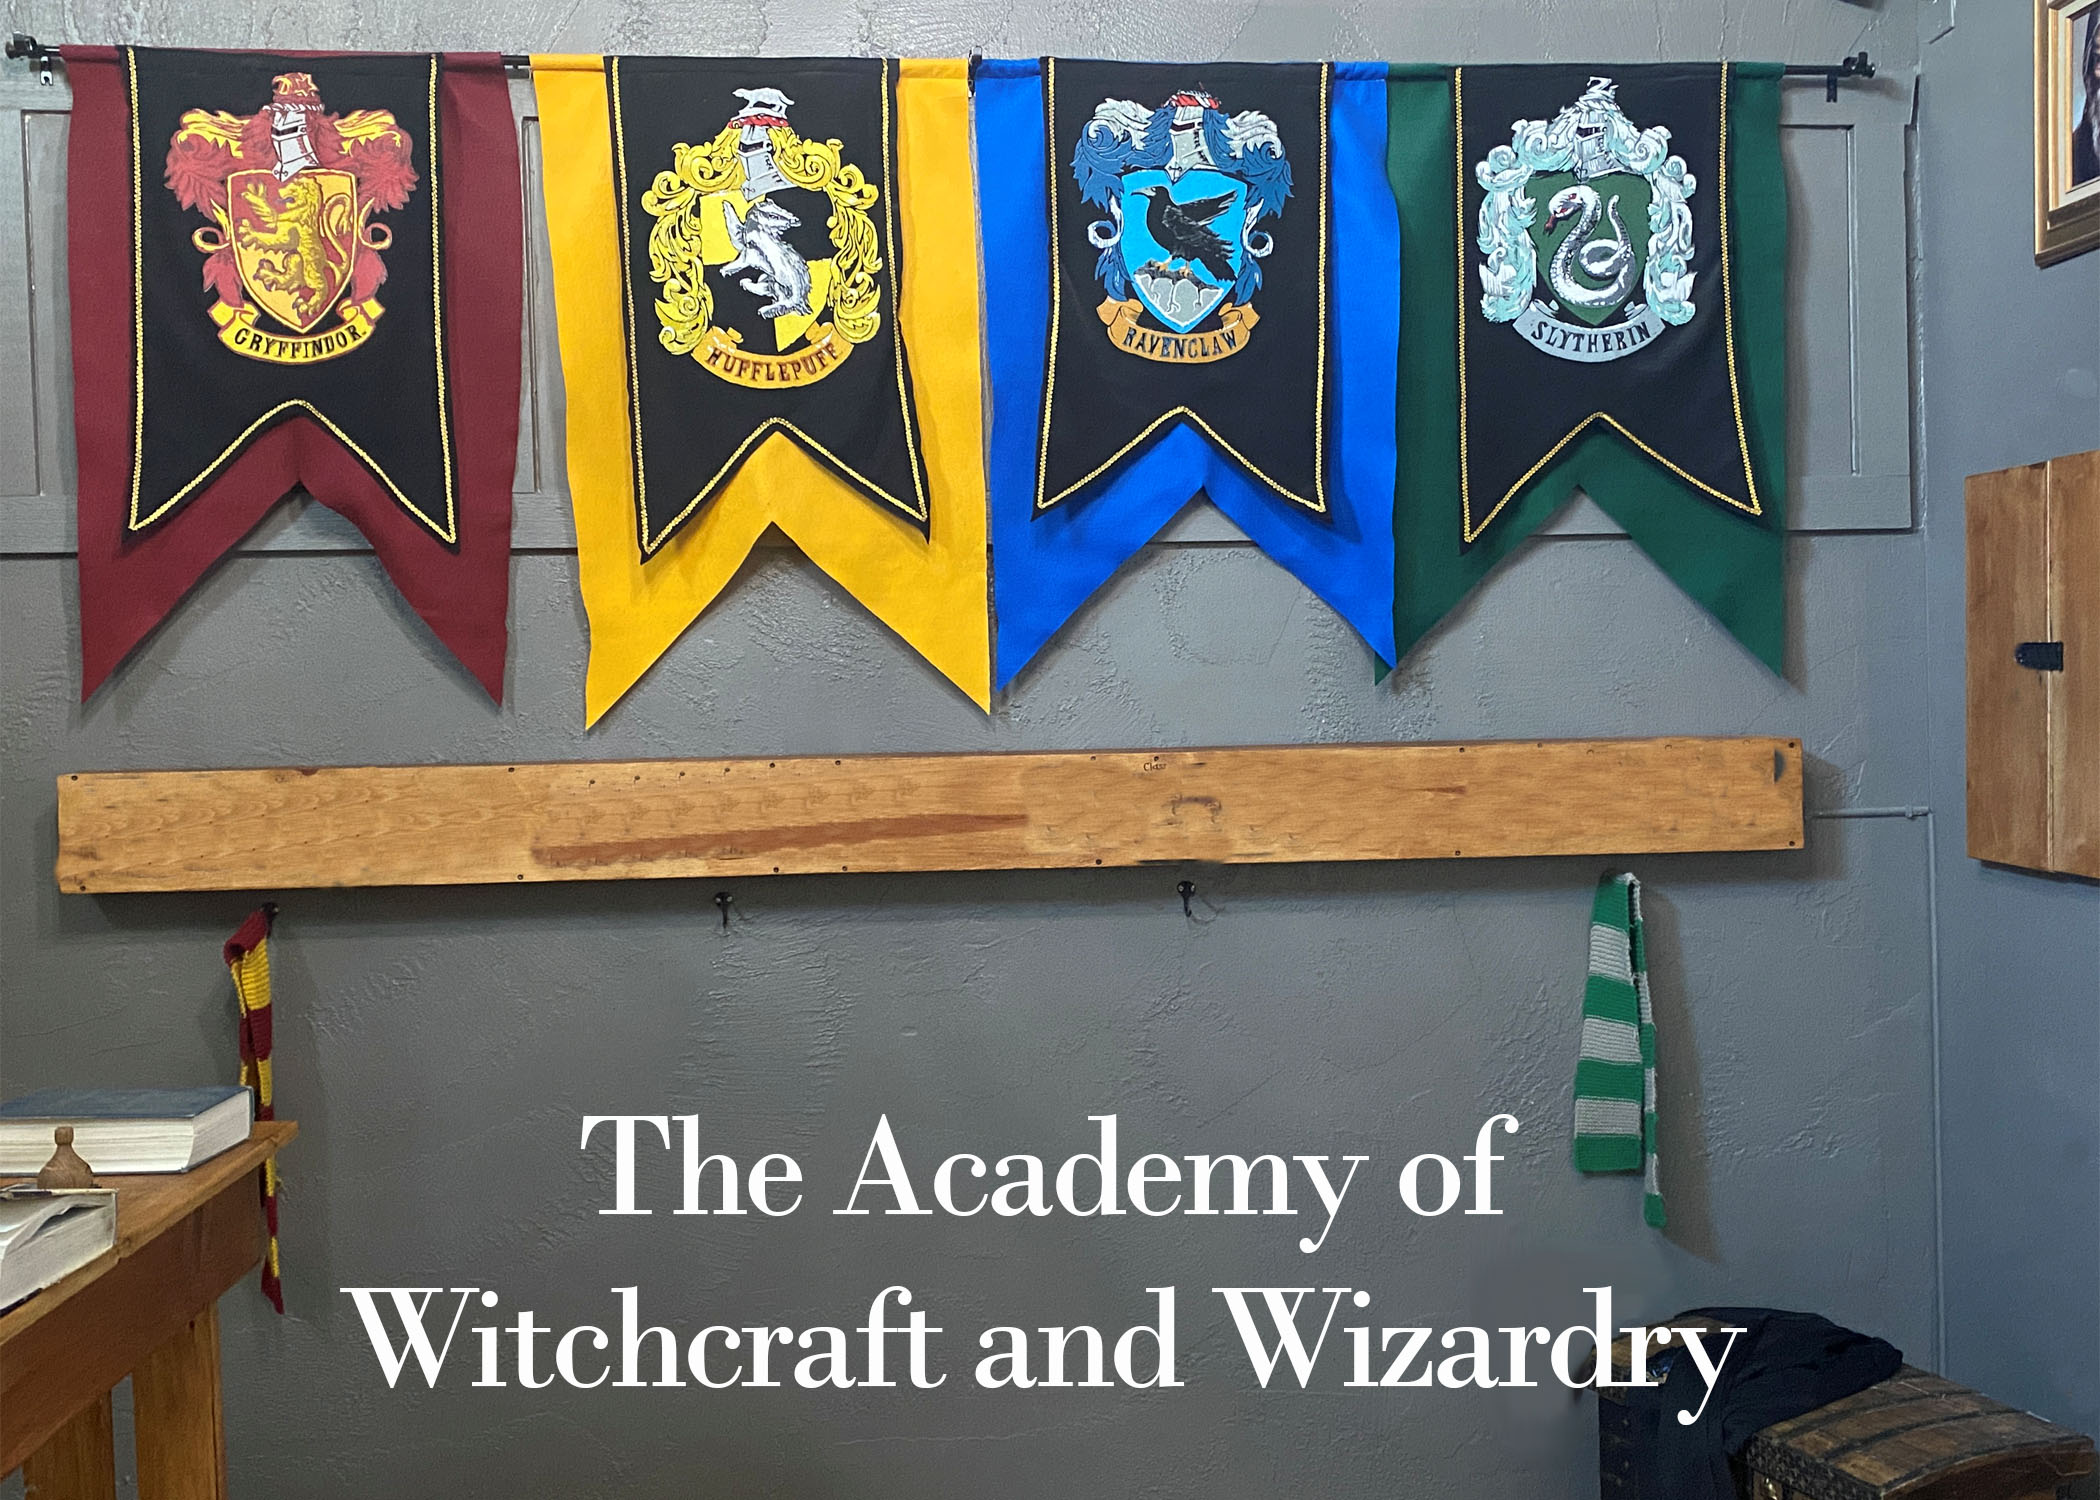 The Academy of Witchcraft and Wizardry